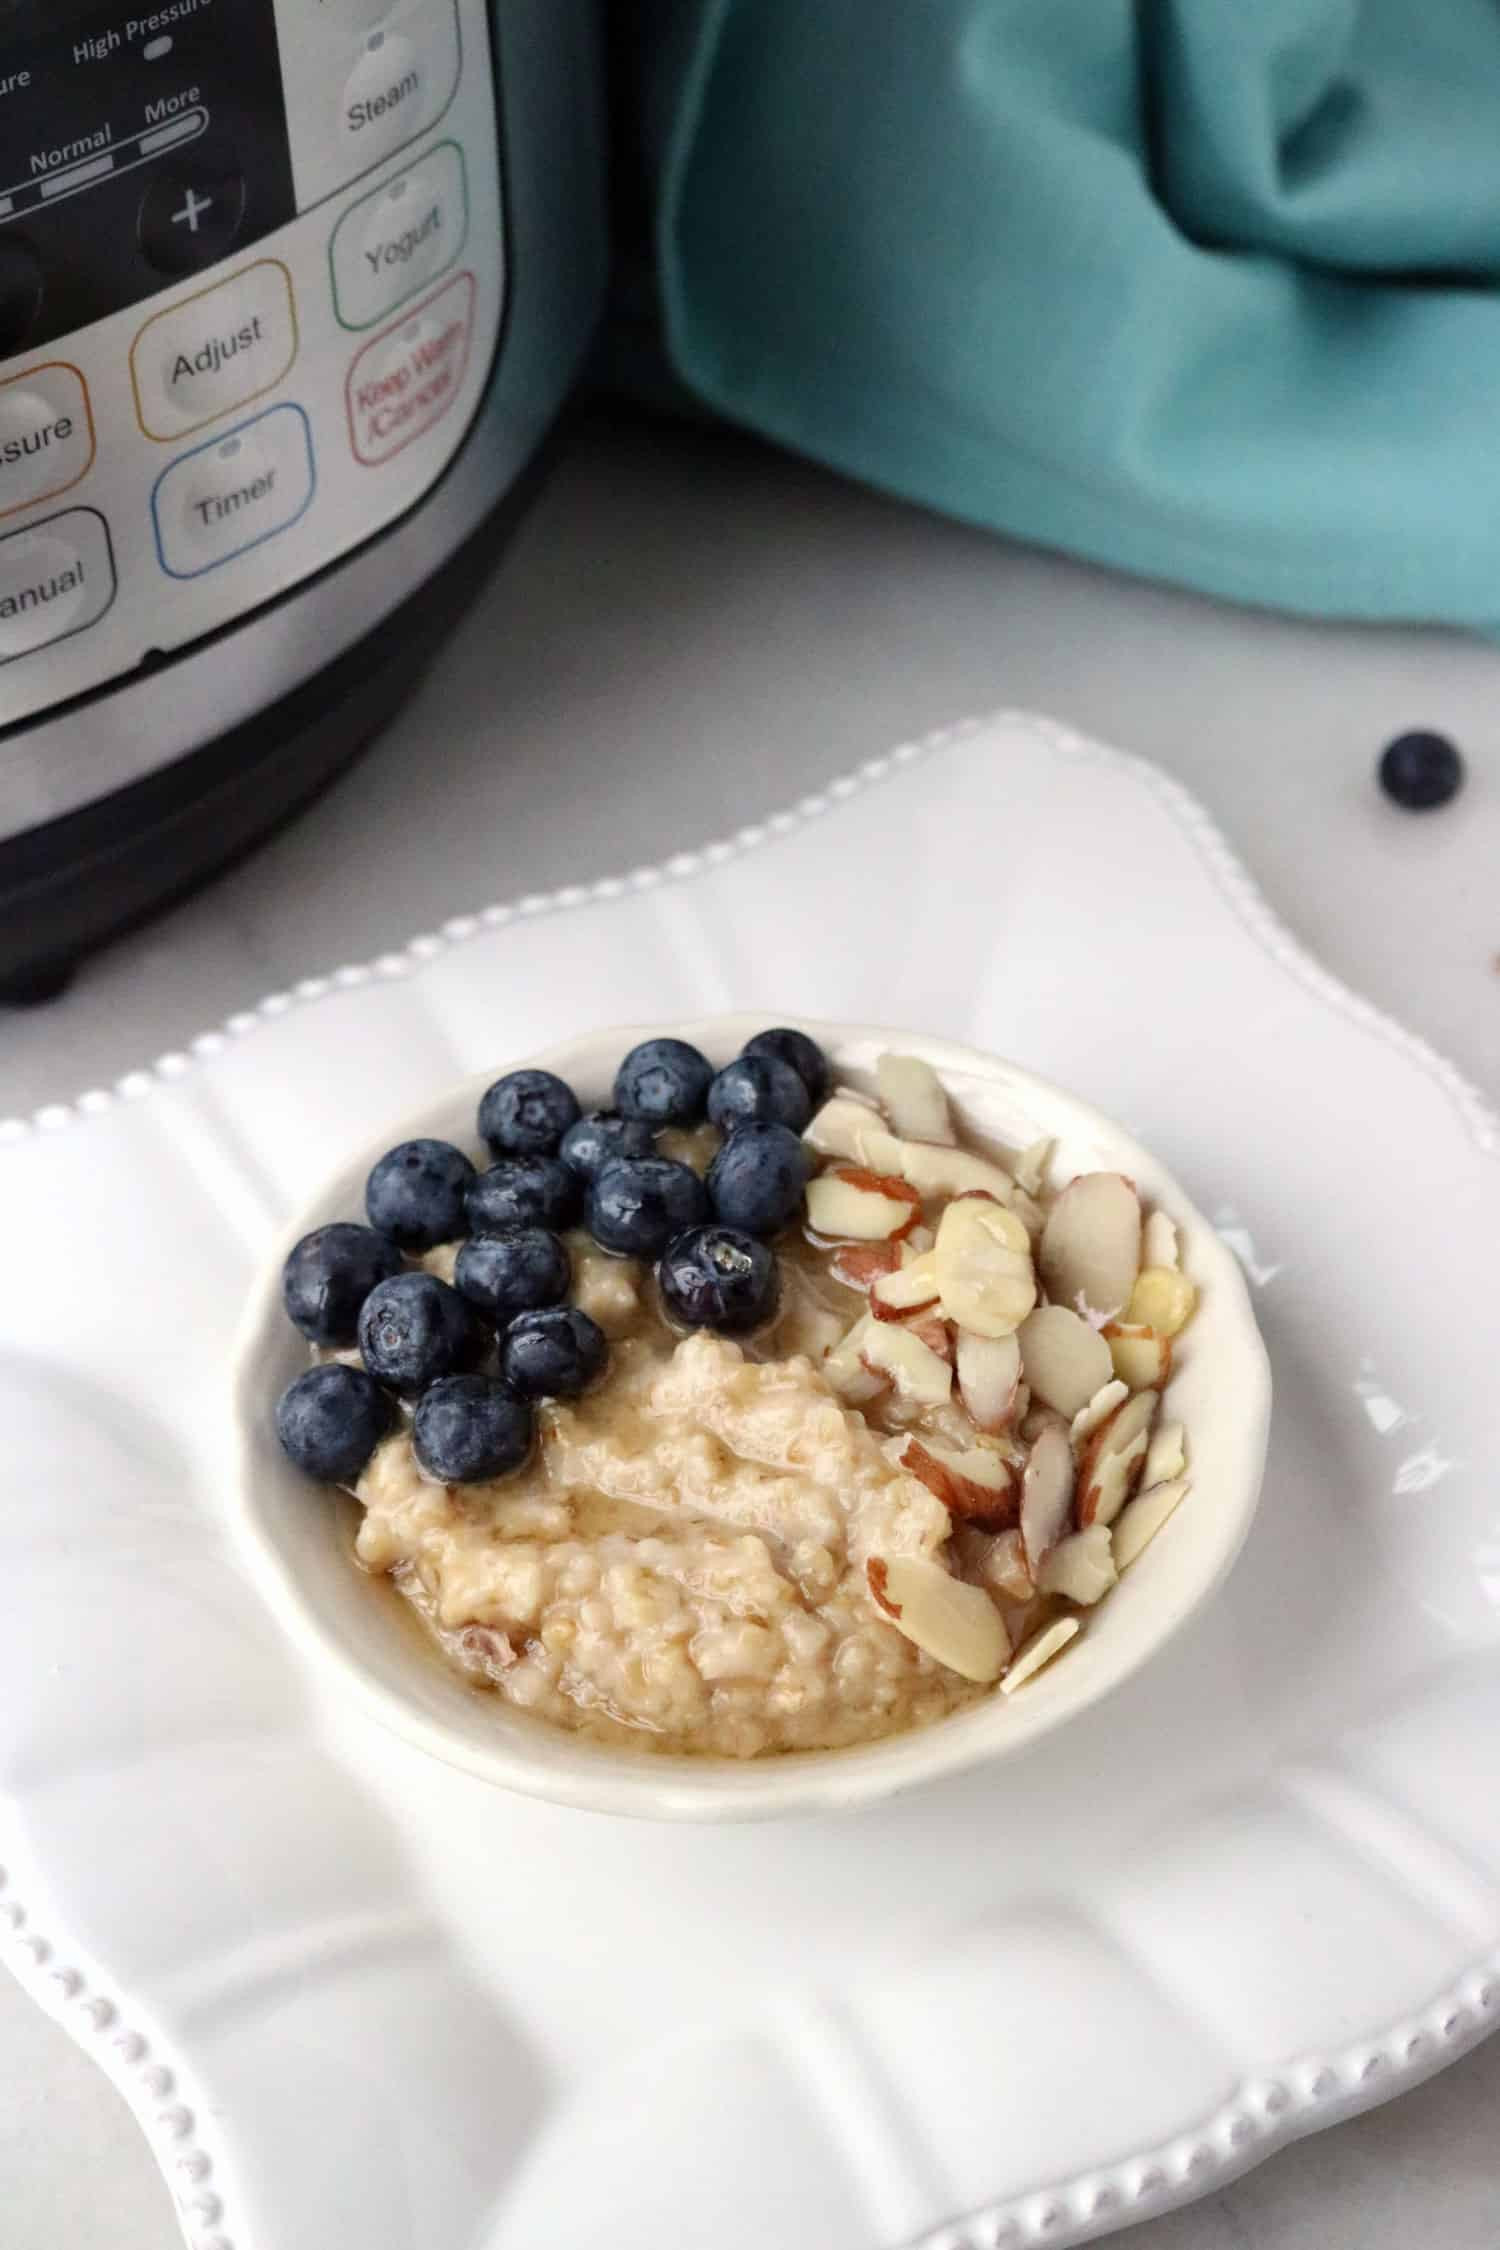 Instant Pot Steel Cut Oats Almond Milk Lovely Instant Pot Steel Cut Oats with Blueberries Almonds and